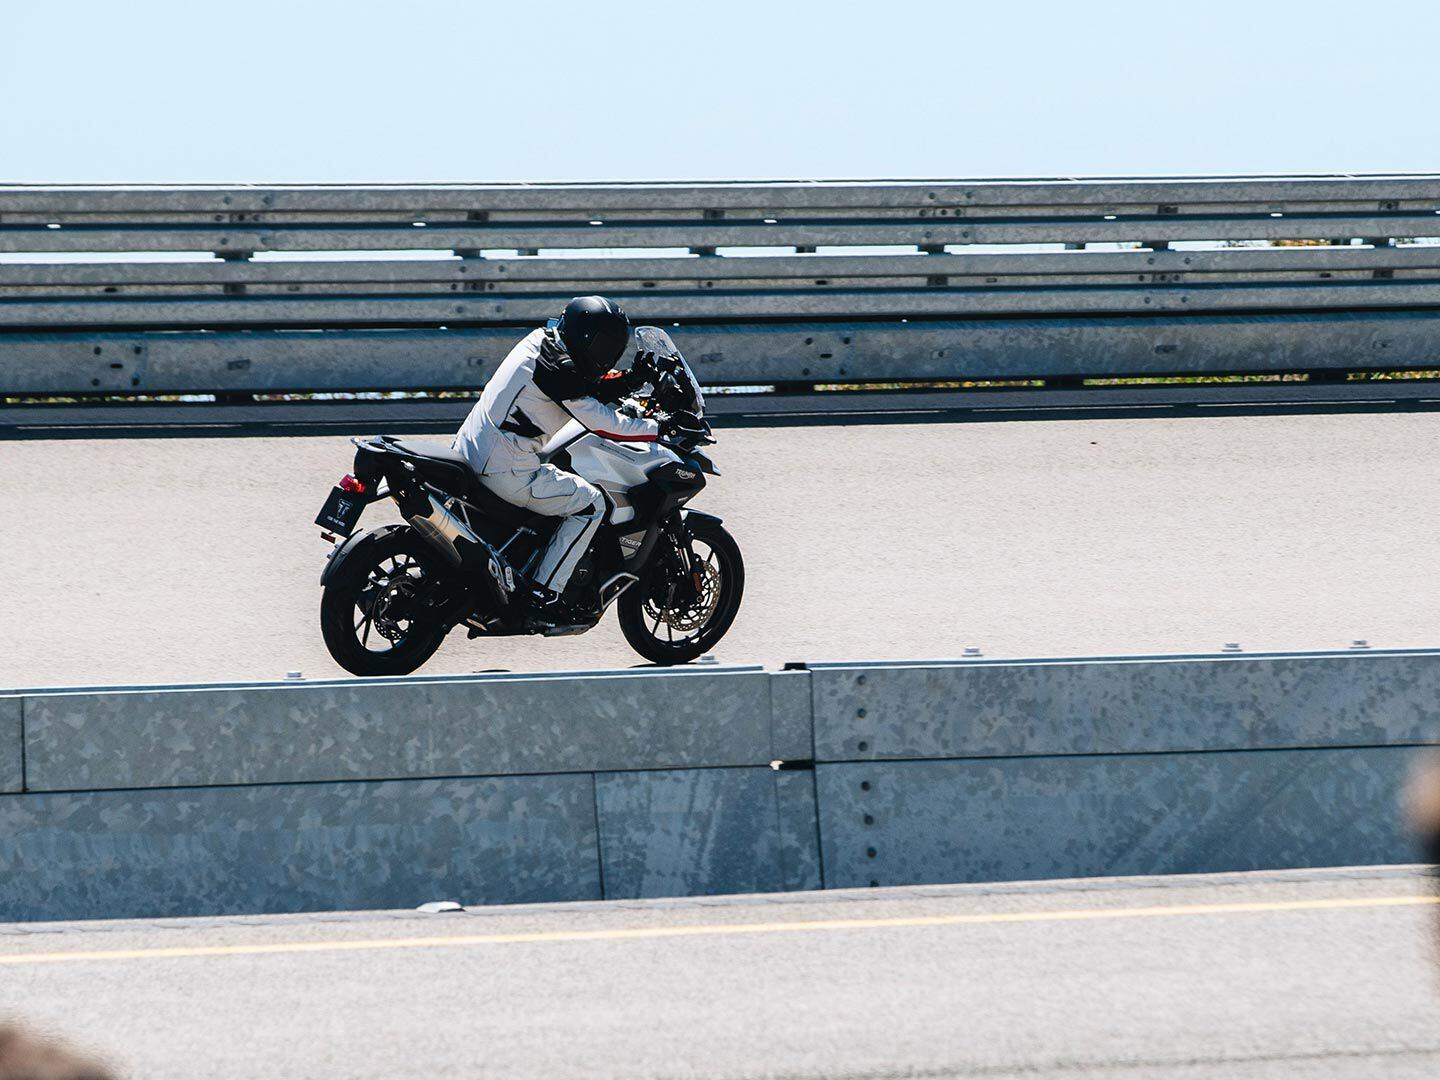 Iván Cervantes has just claimed the Guinness record for greatest distance on a motorcycle in 24 hours, piloting a Triumph Tiger 1200 GT Explorer.